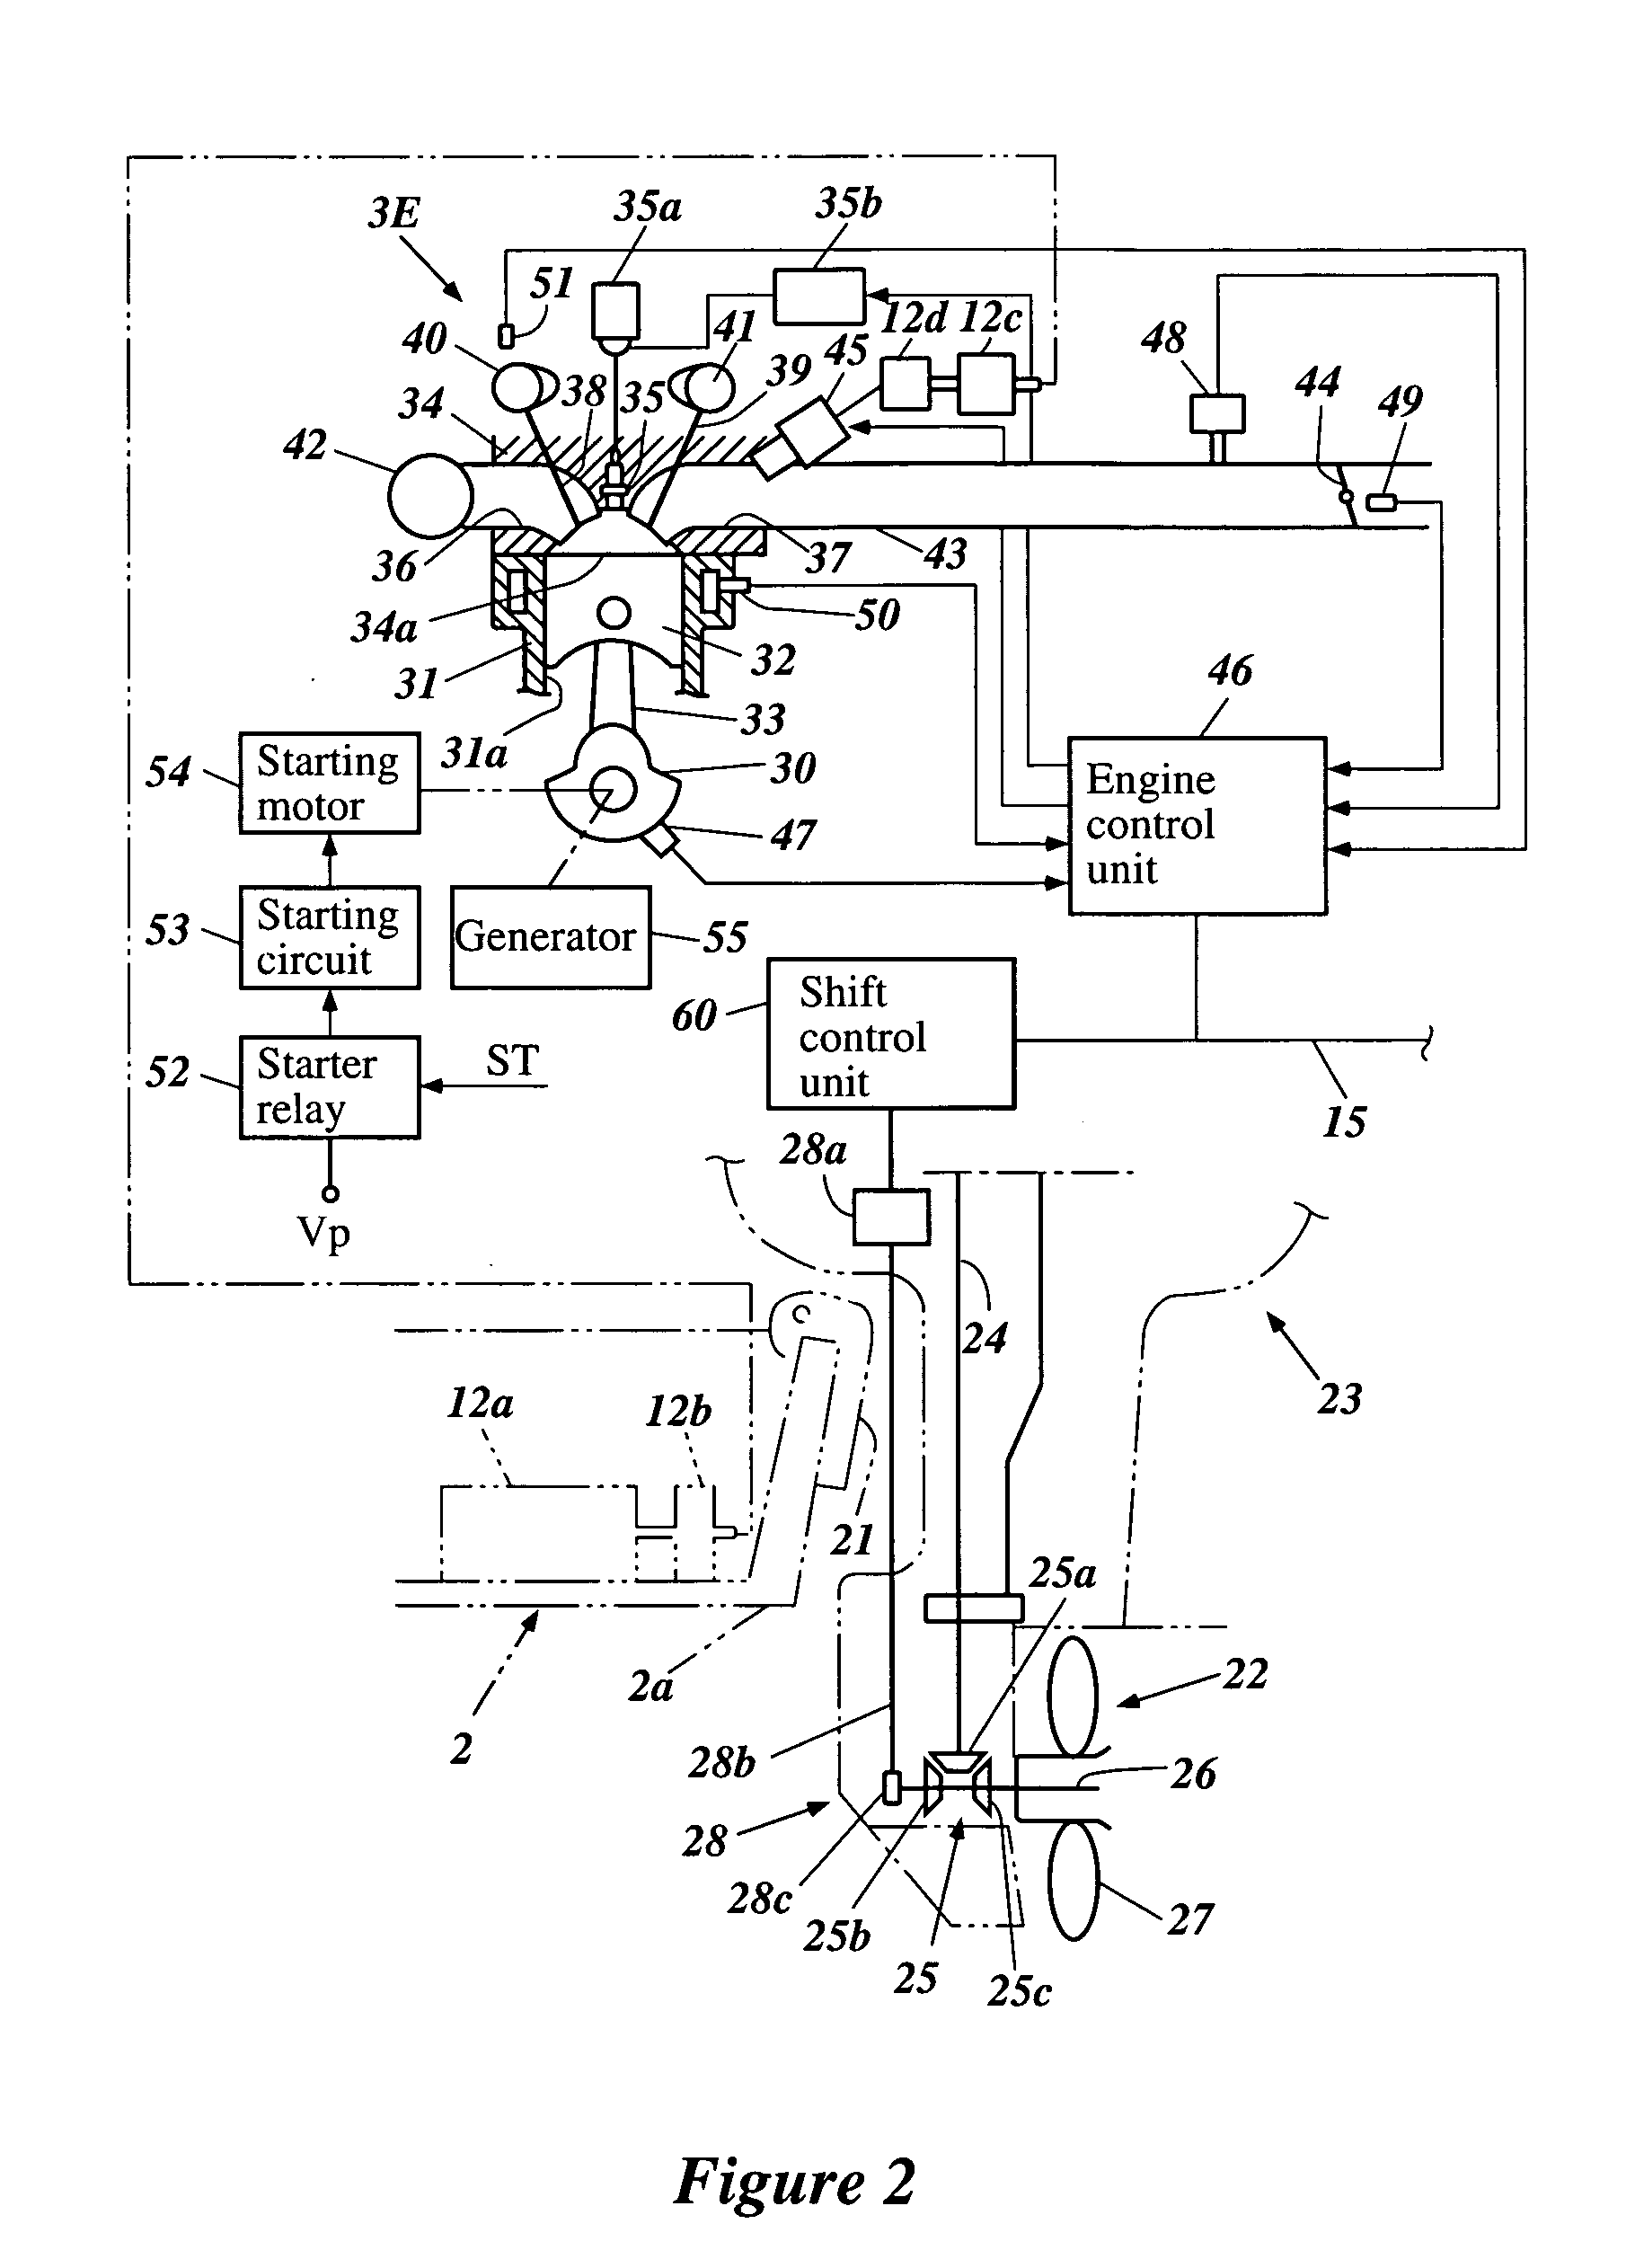 Power source device for boat